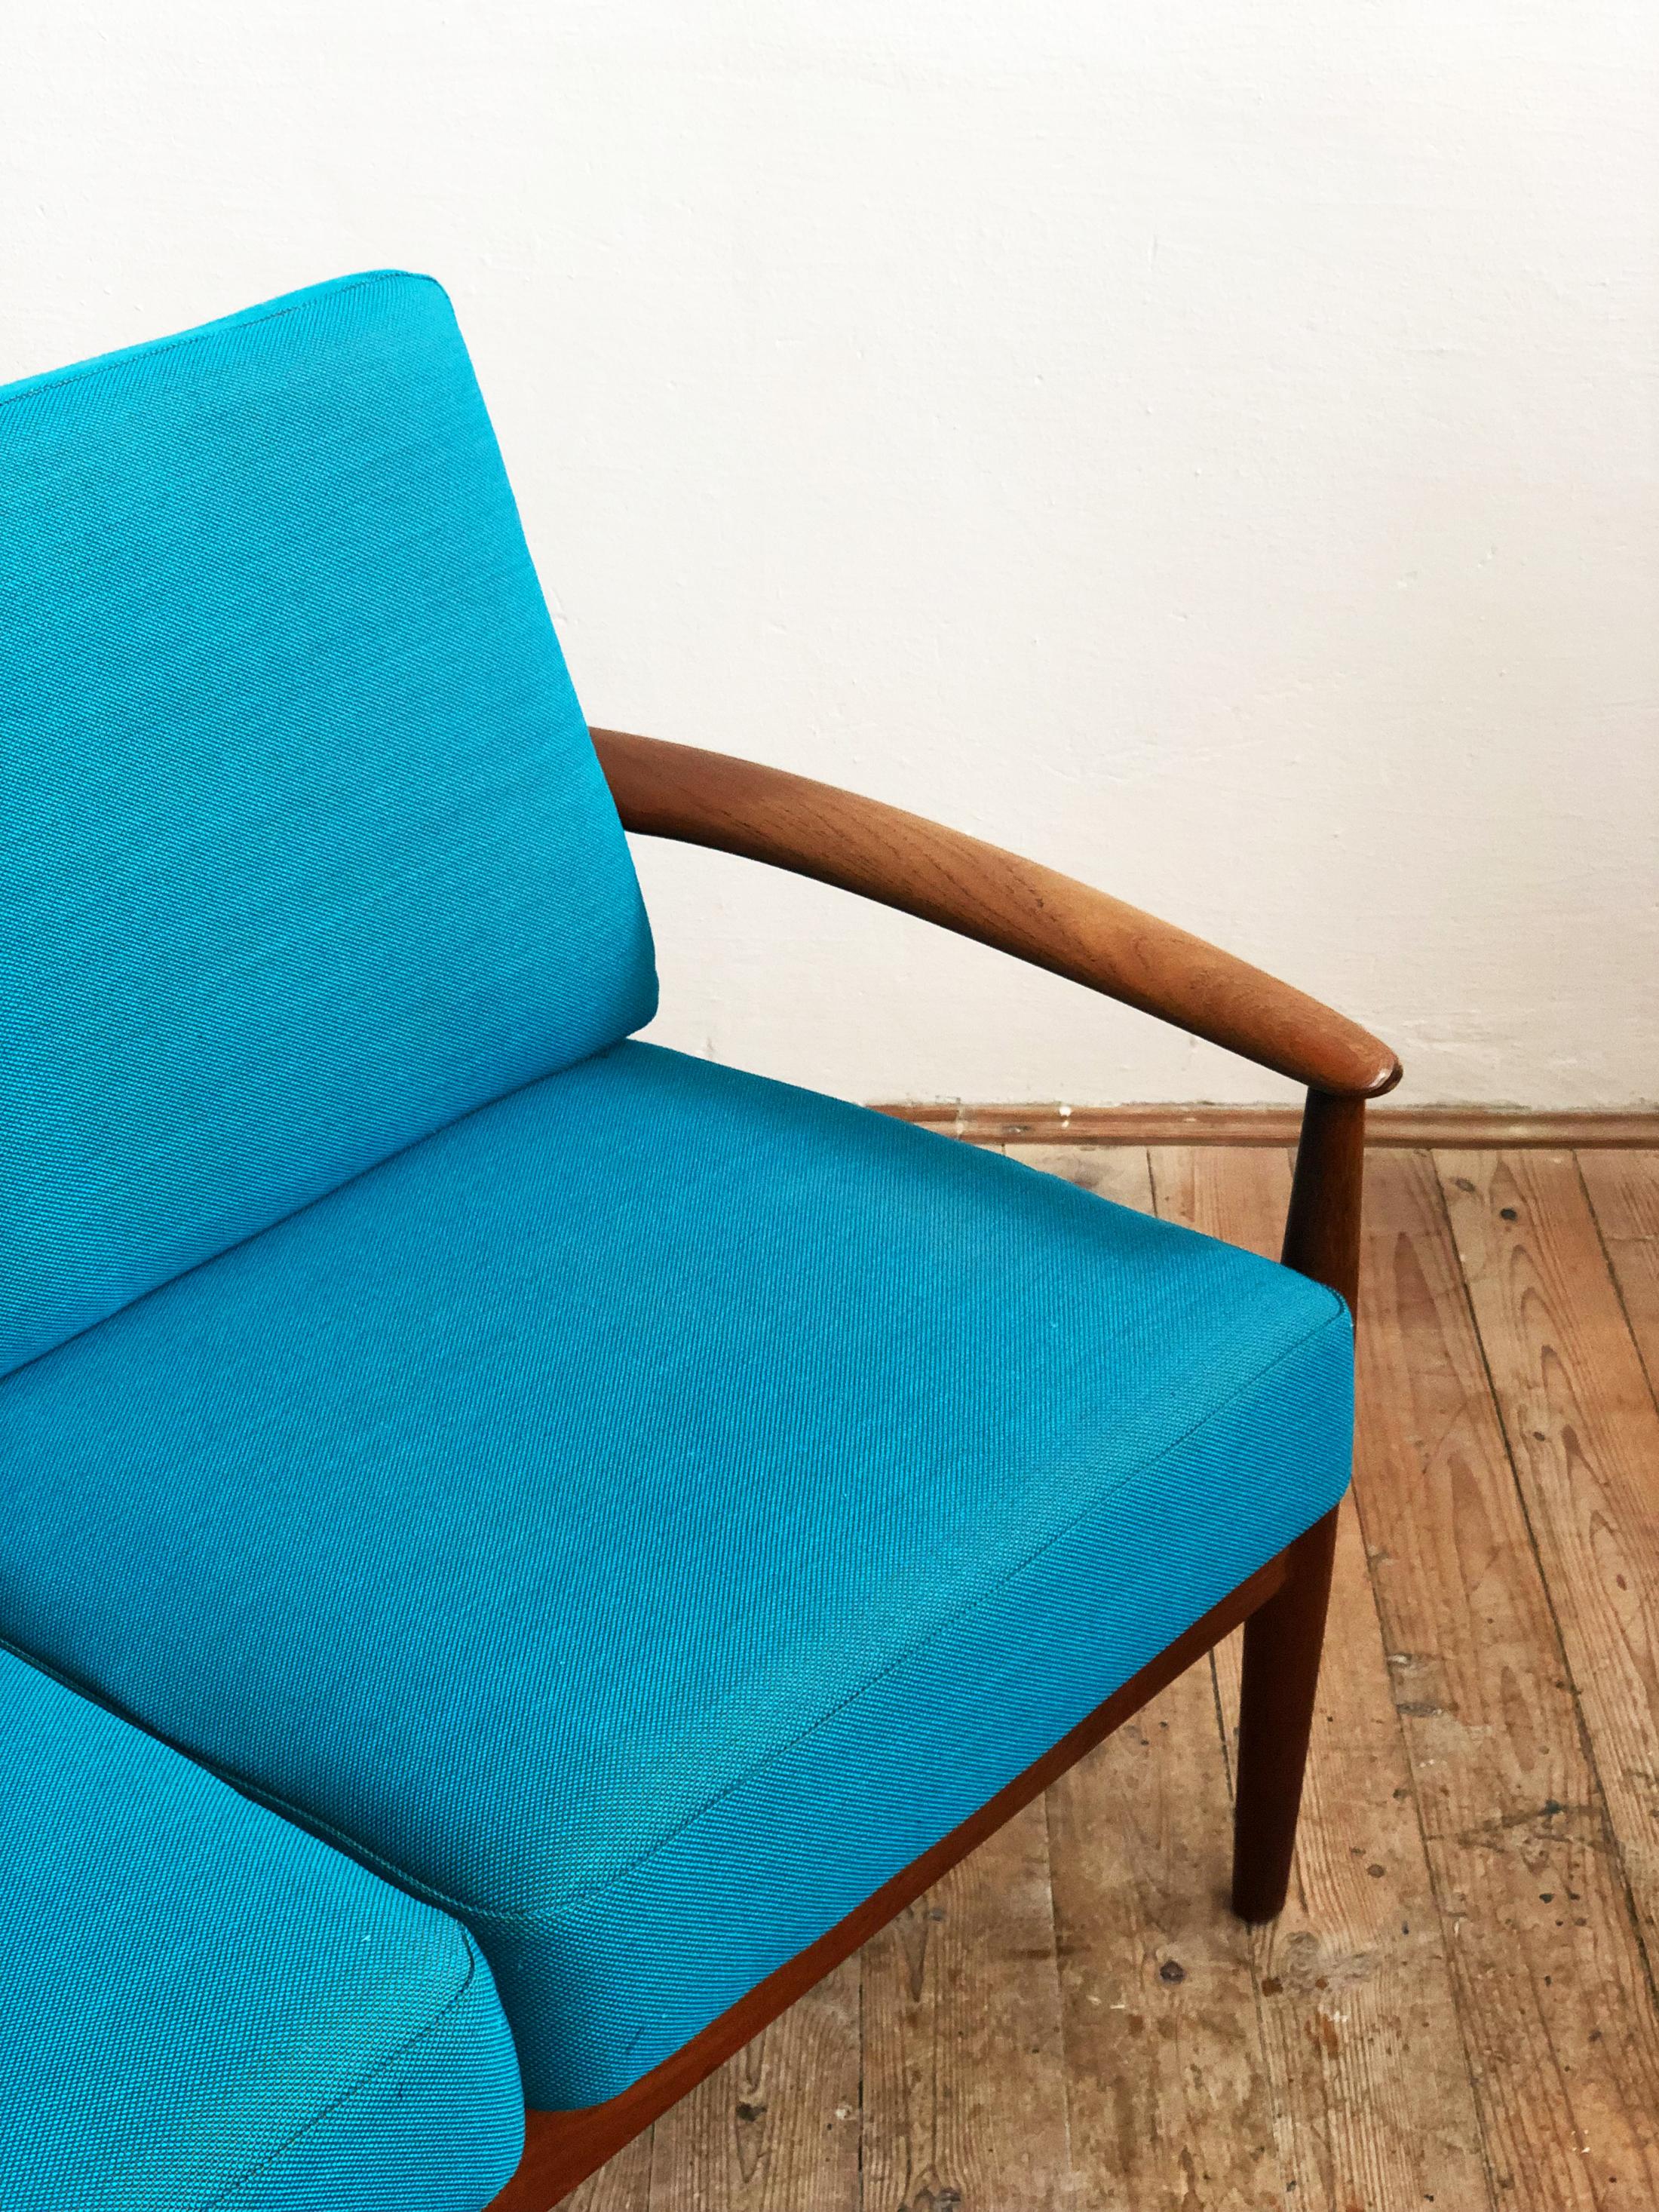 Midcentury Teak Sofa with Turquoise Upholstery by Grete Jalk for France & Son  For Sale 1